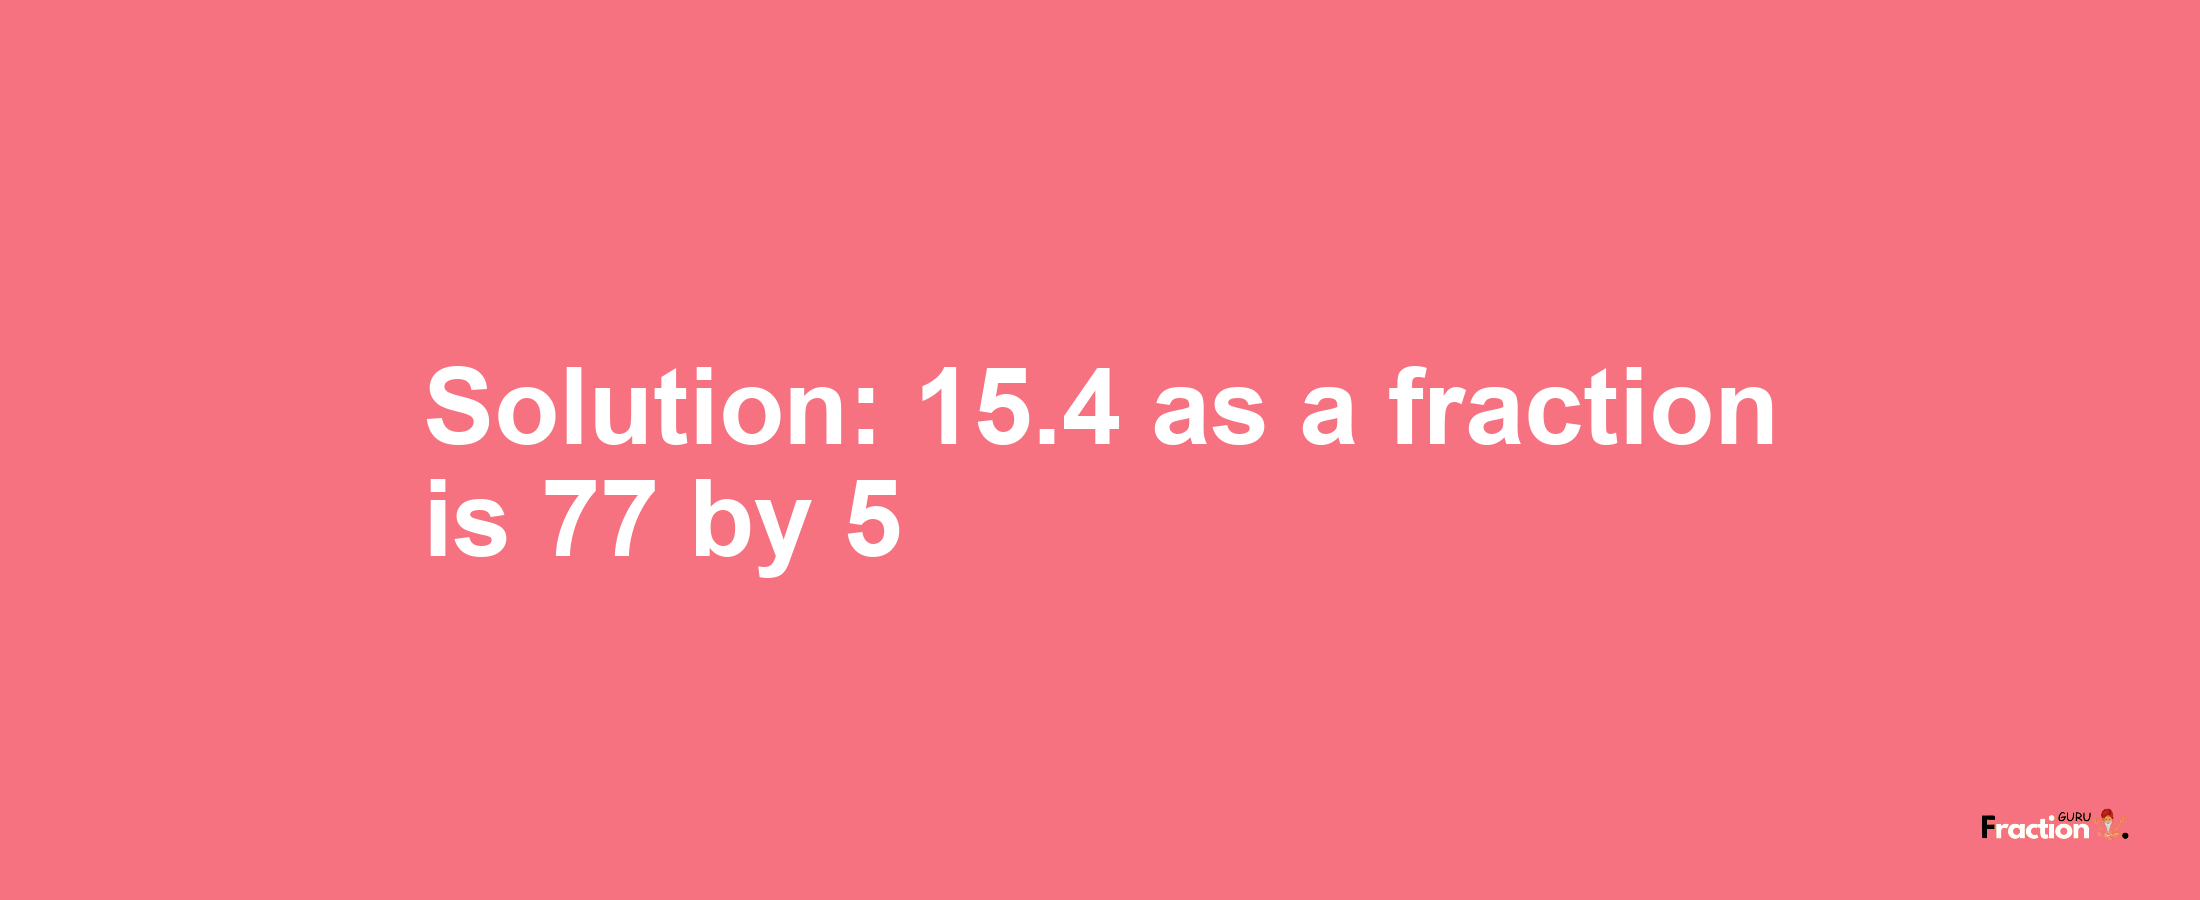 Solution:15.4 as a fraction is 77/5